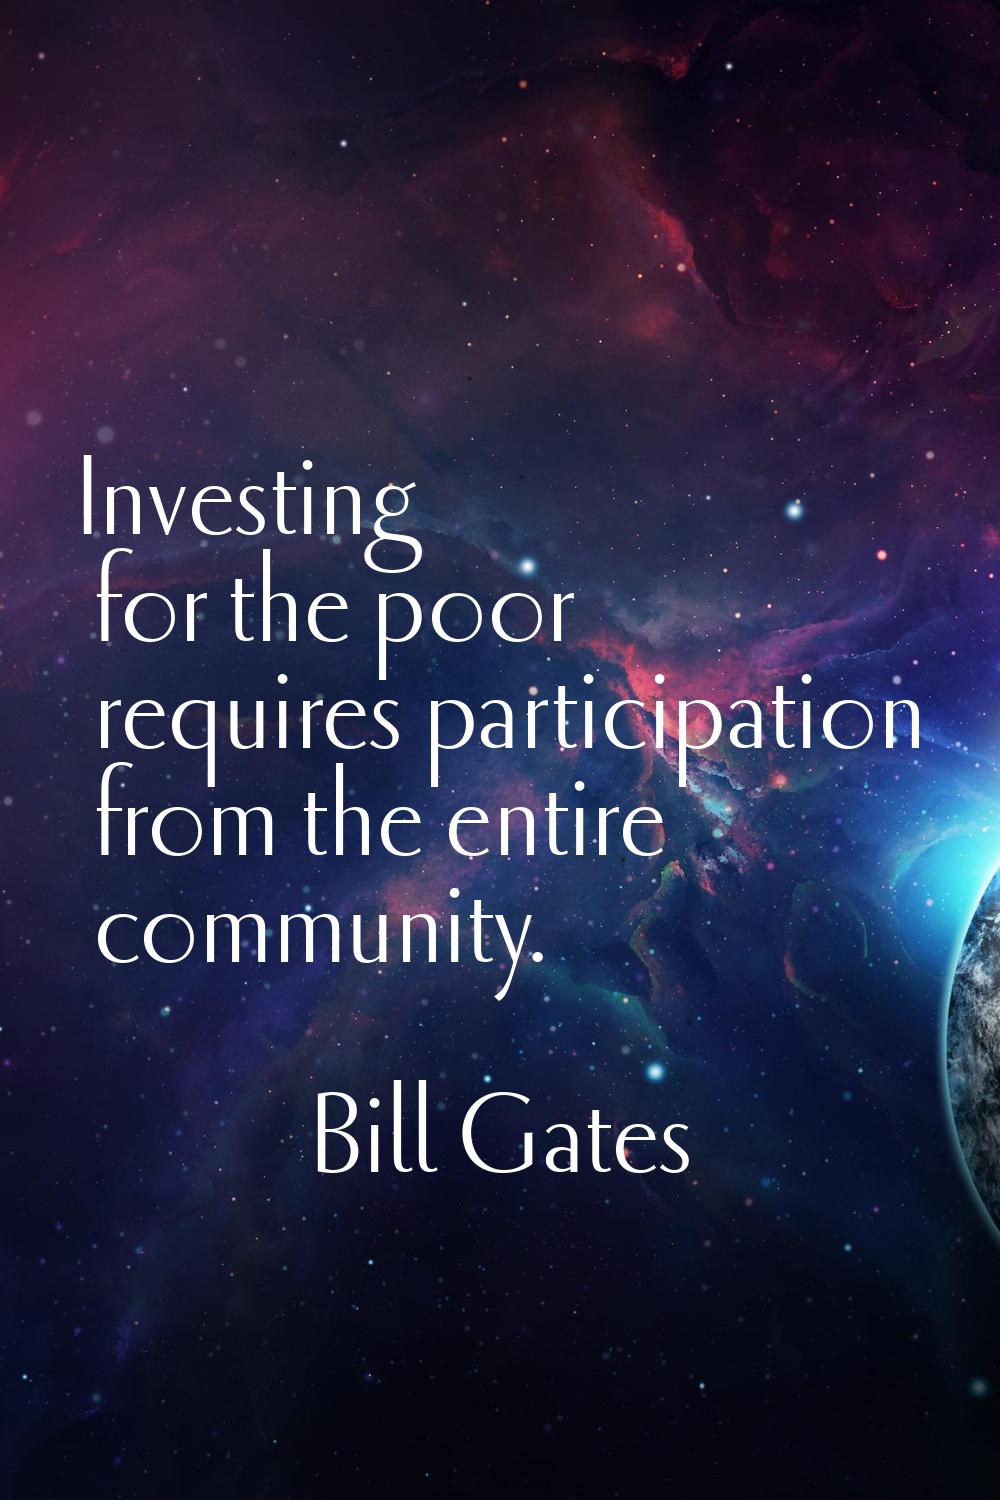 Investing for the poor requires participation from the entire community.